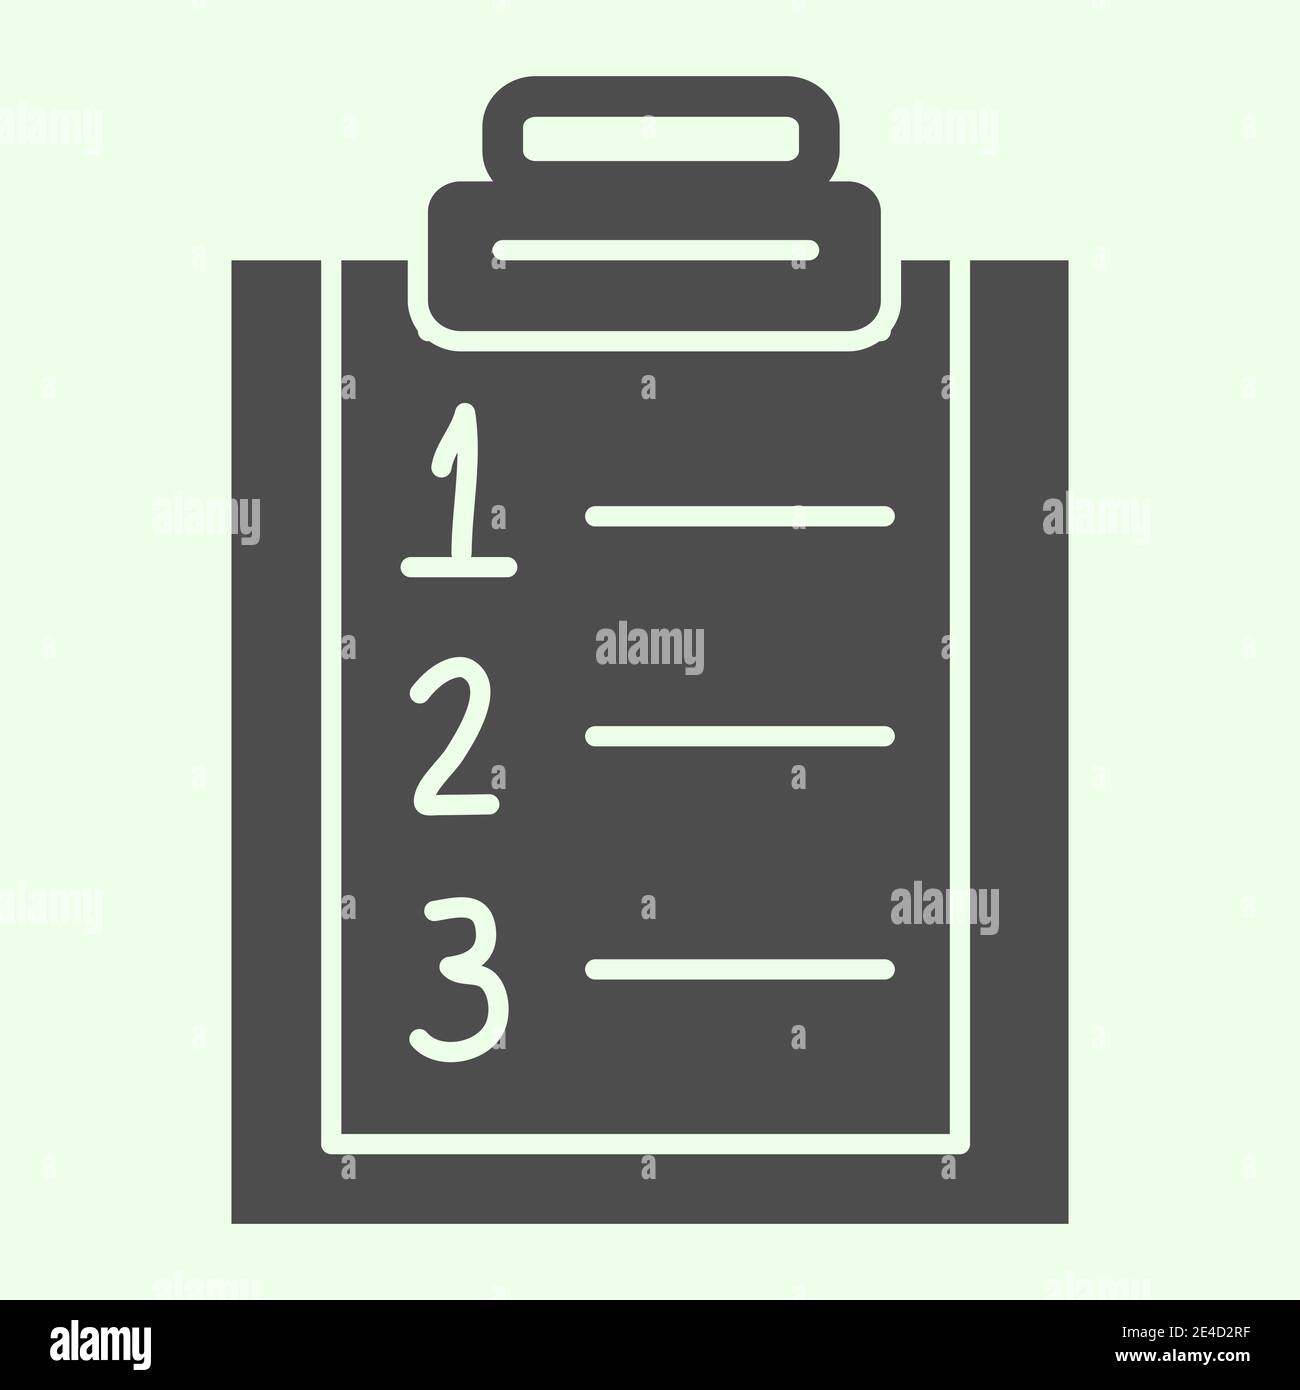 Plan list solid icon. Checklist with ranking numbers on clipboard glyph style pictogram on white background. Numbered to do plan for mobile concept Stock Vector